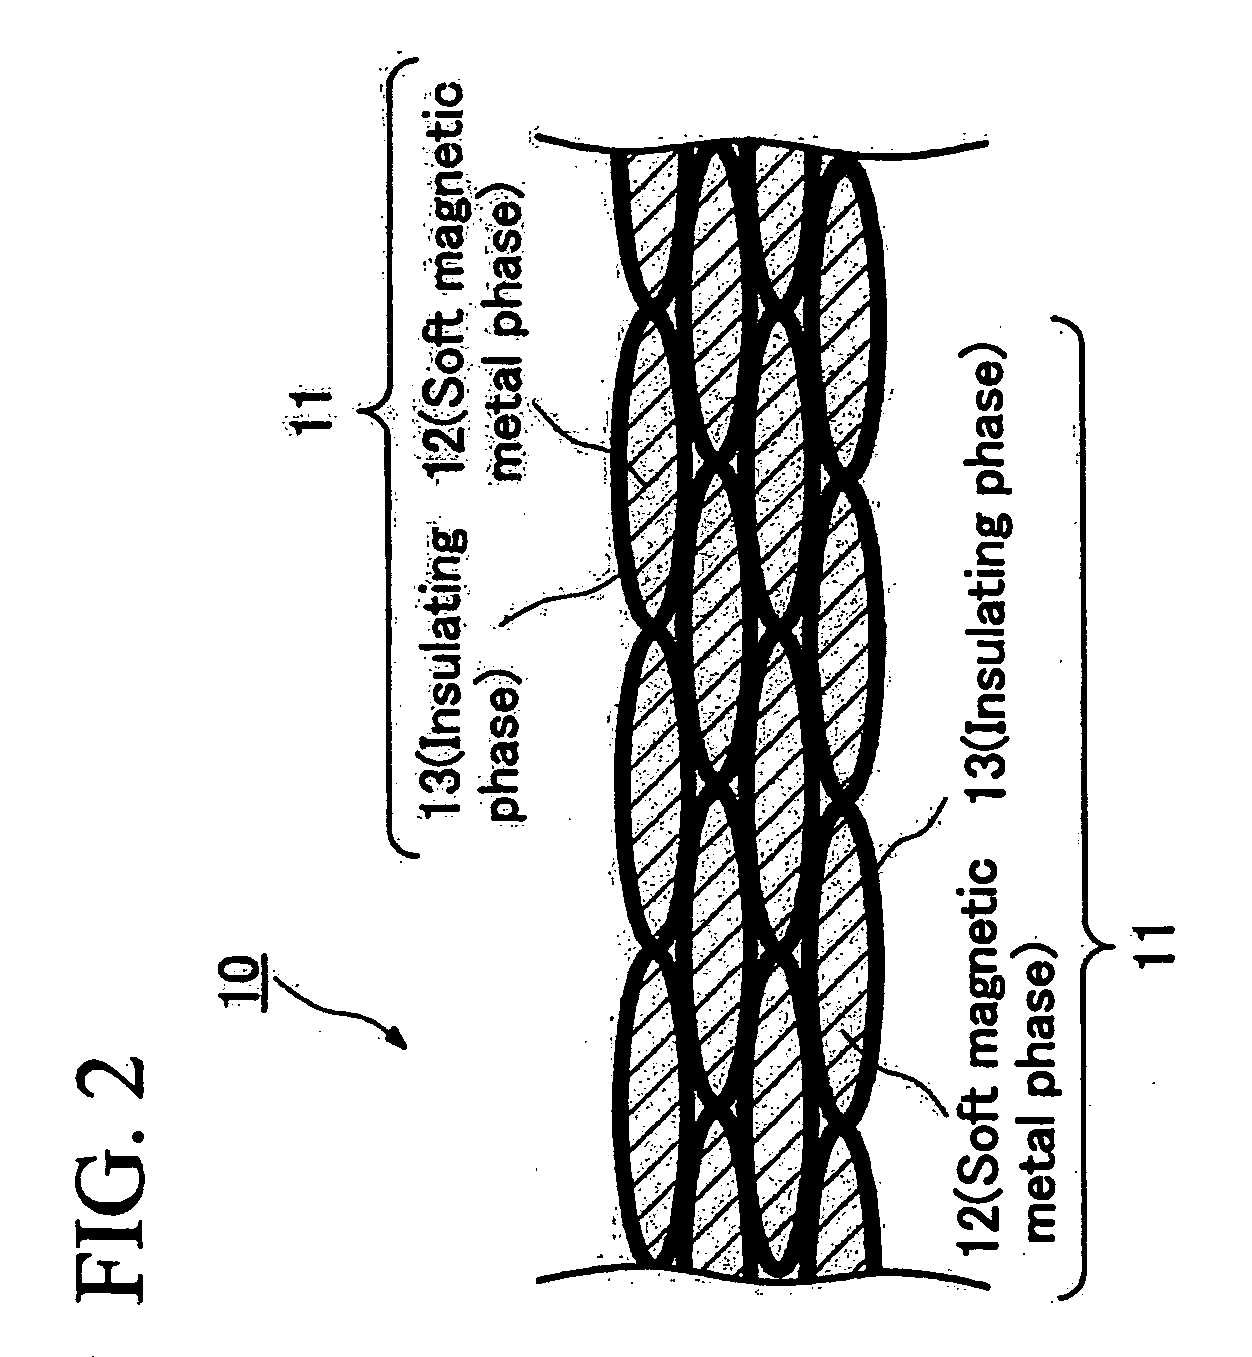 Method for producing electromagnetic wave absorbing sheet, method for classifying powder, and electromagnetic wave absorbing sheet